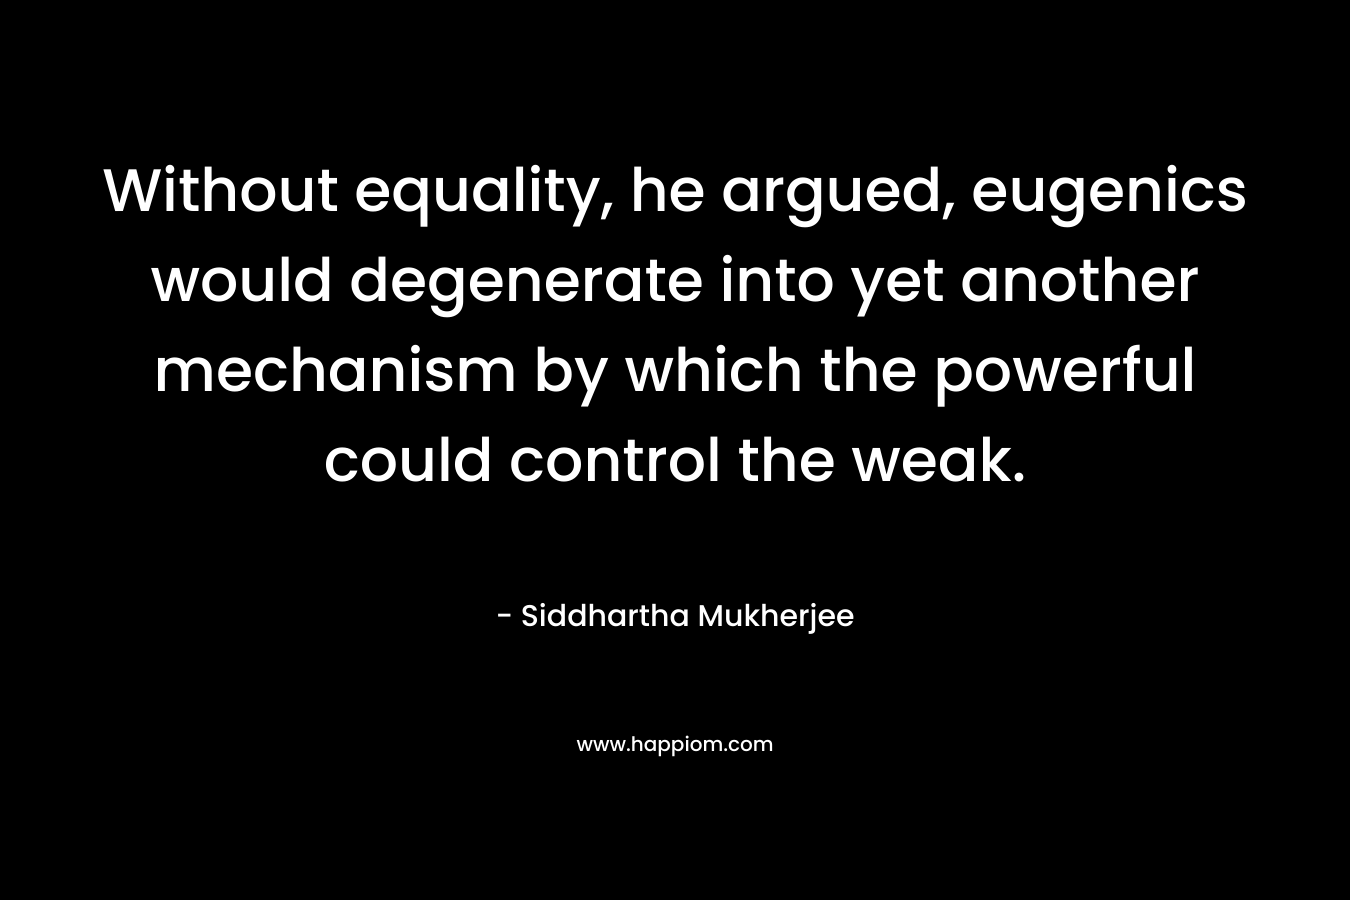 Without equality, he argued, eugenics would degenerate into yet another mechanism by which the powerful could control the weak. – Siddhartha Mukherjee